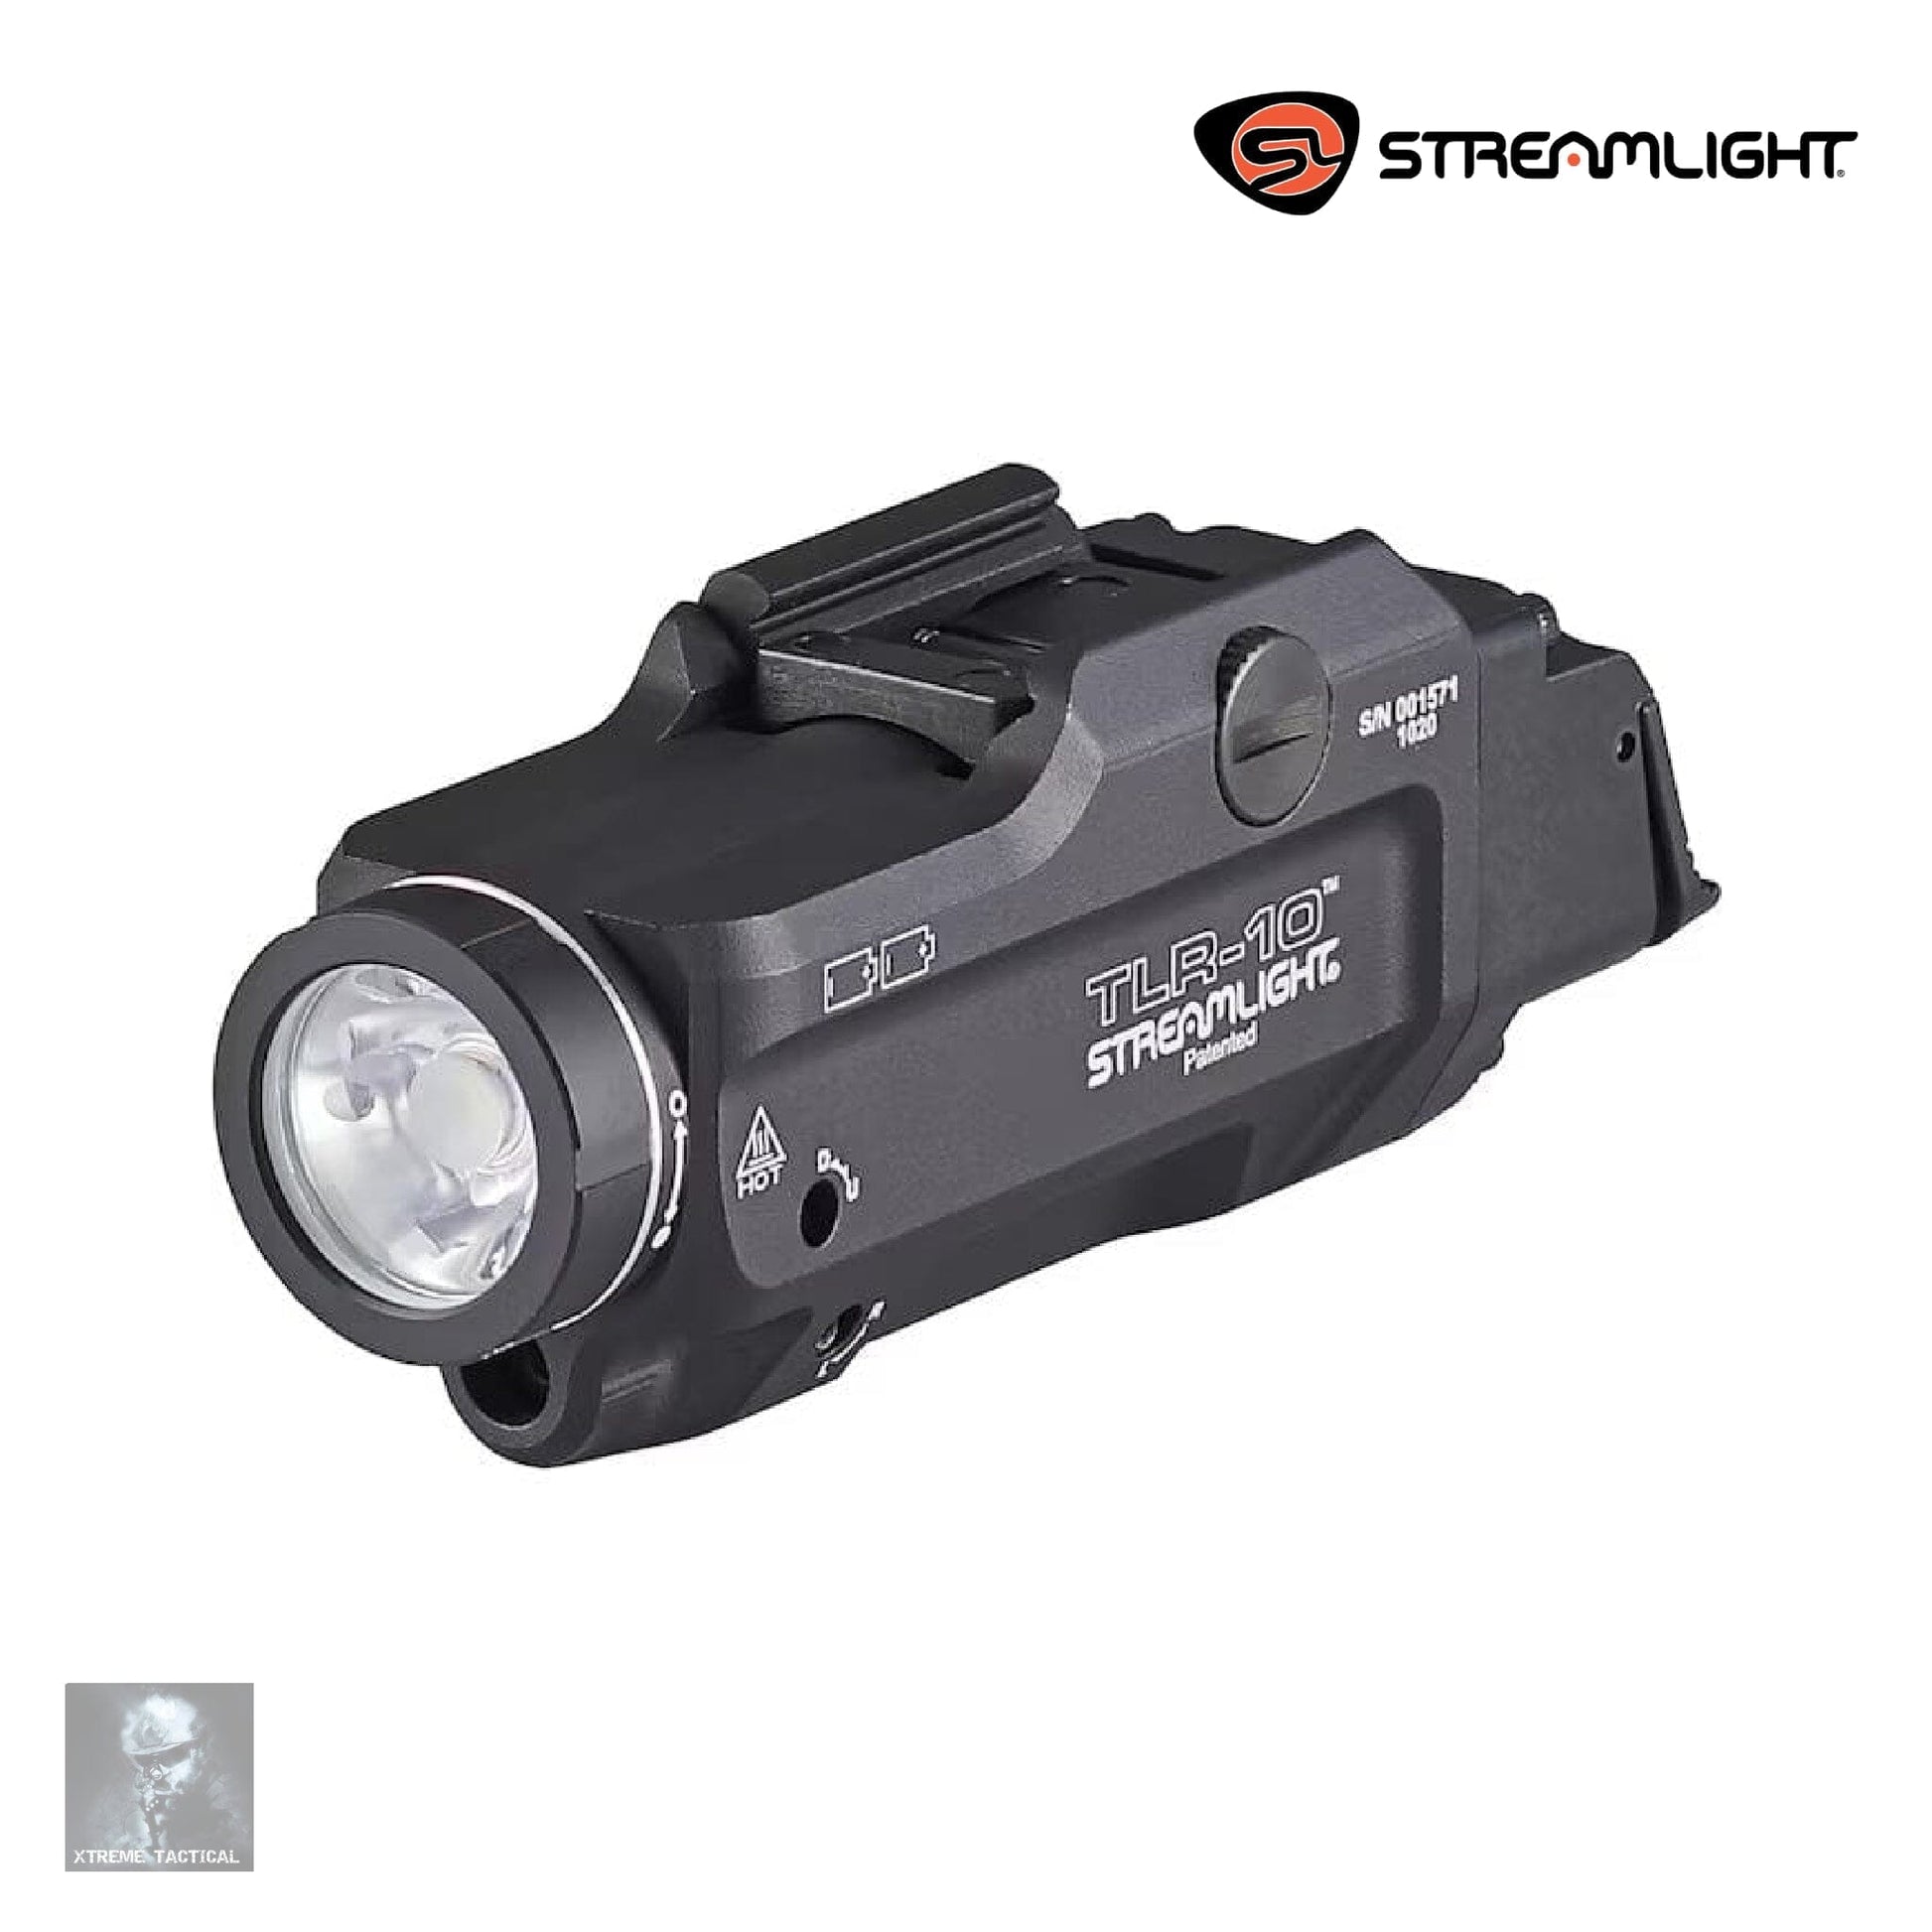 Streamlight TLR-10 Flex Weapon Light with Green Laser - 69473 Weapon Light Streamlight 